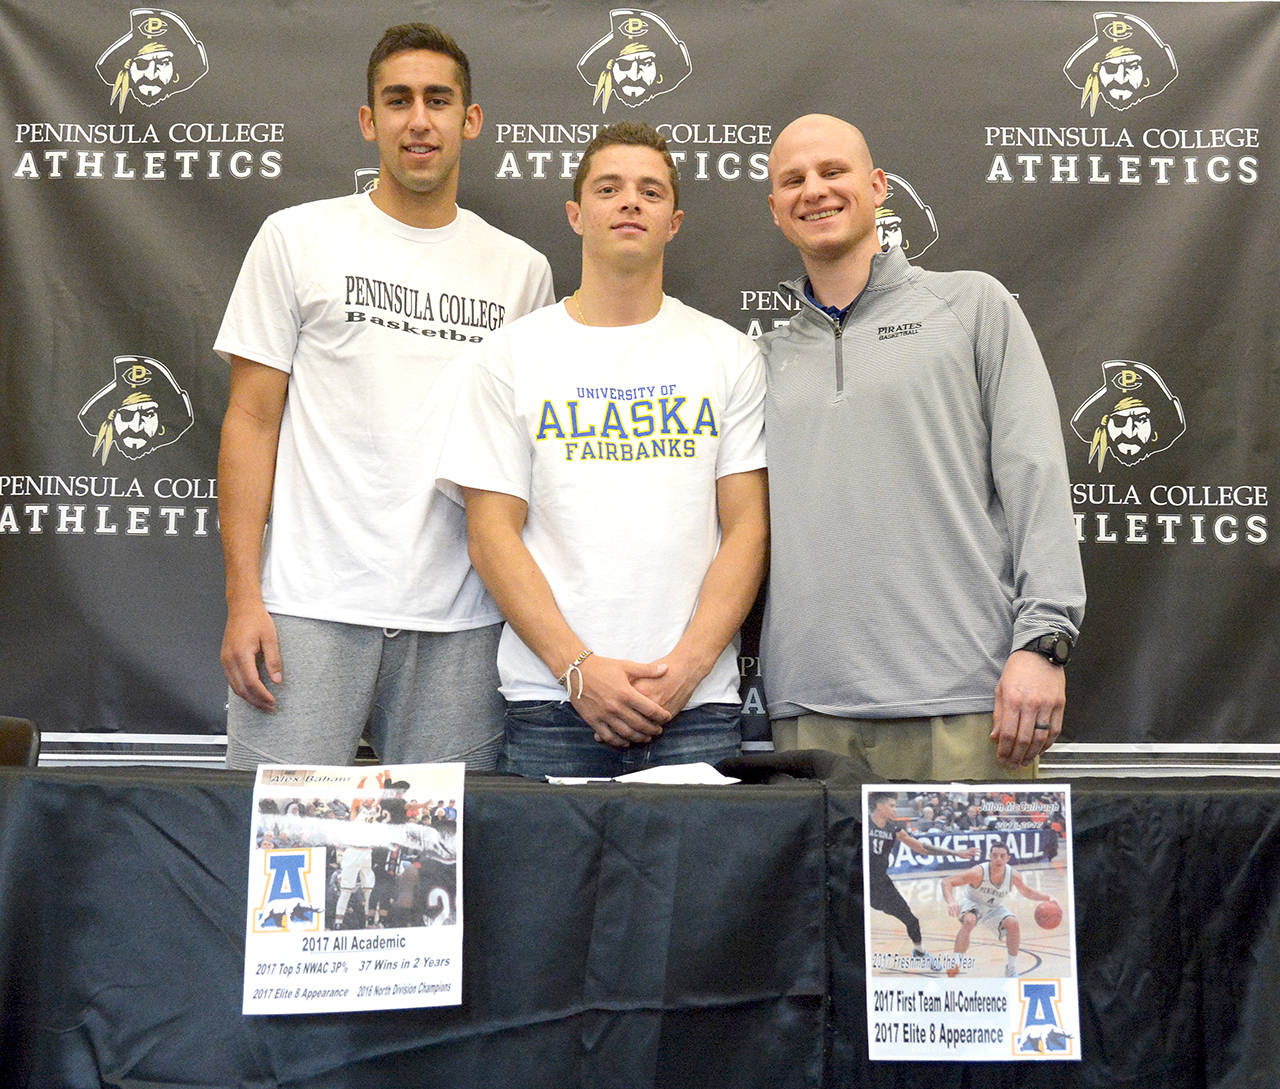 Peninsula College Athletics                                Peninsula College men’s basketball players, from left, Alex Baham and Jalon McCullough are pictured with Pirates head coach Mitch Freeman after signing letters of intent to continue their college careers with the University of Alaska-Fairbanks. Baham is from Wasilla, Alaska and McCullough is from Fairbanks.